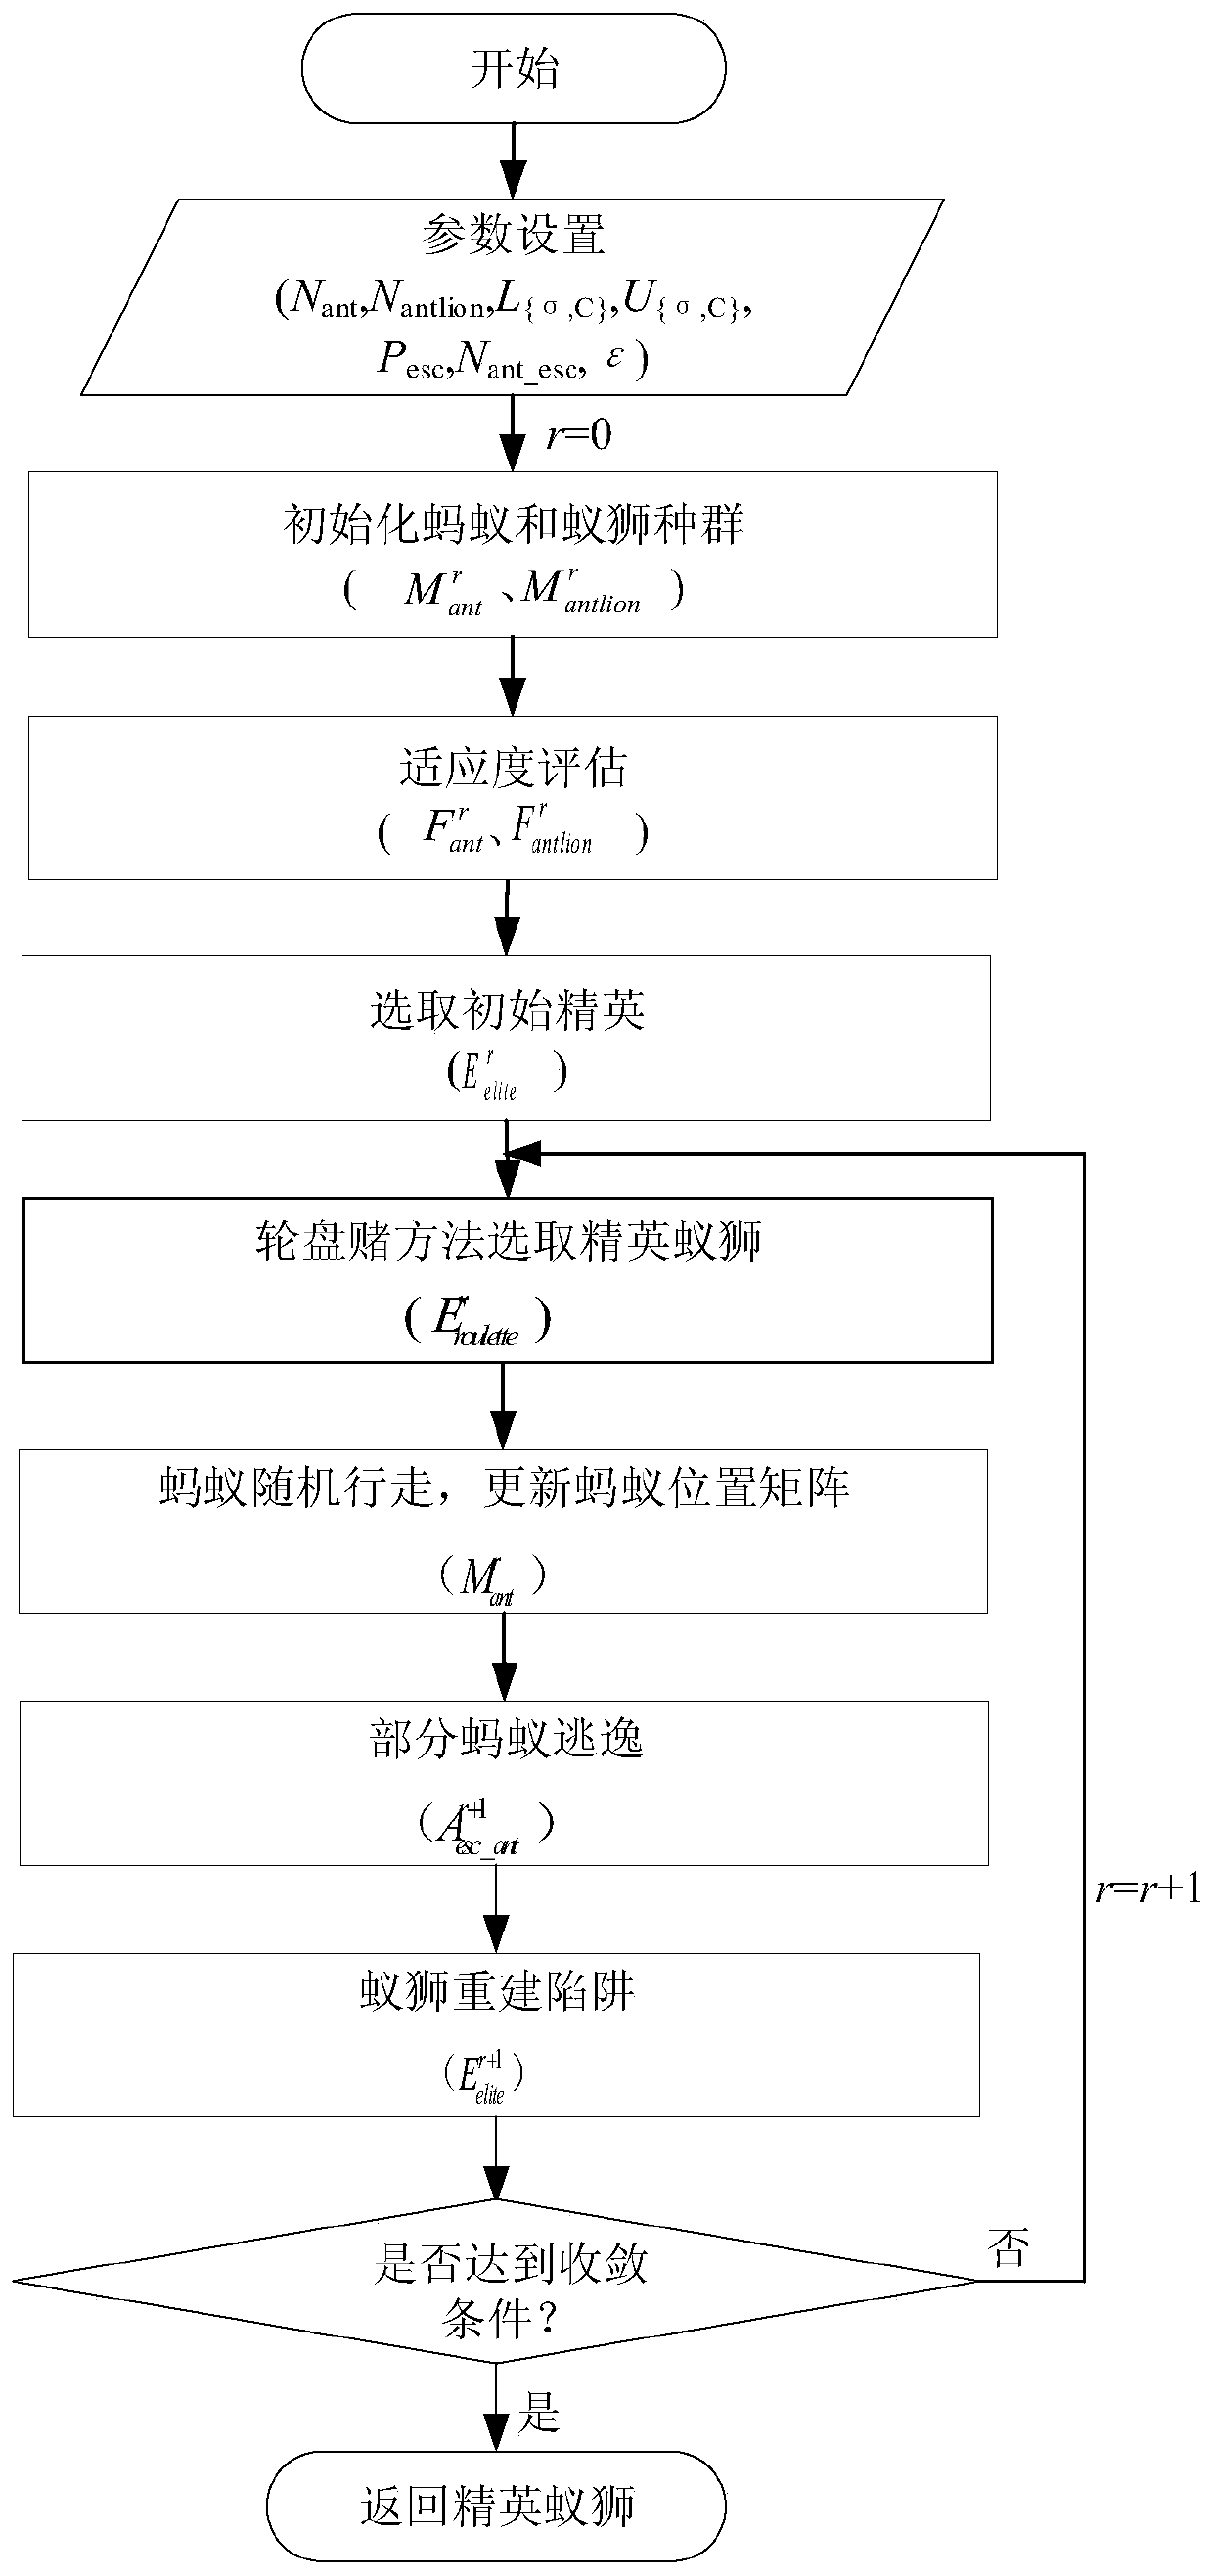 Bearing fault diagnosis method based on improved ant lion algorithm and support vector machine